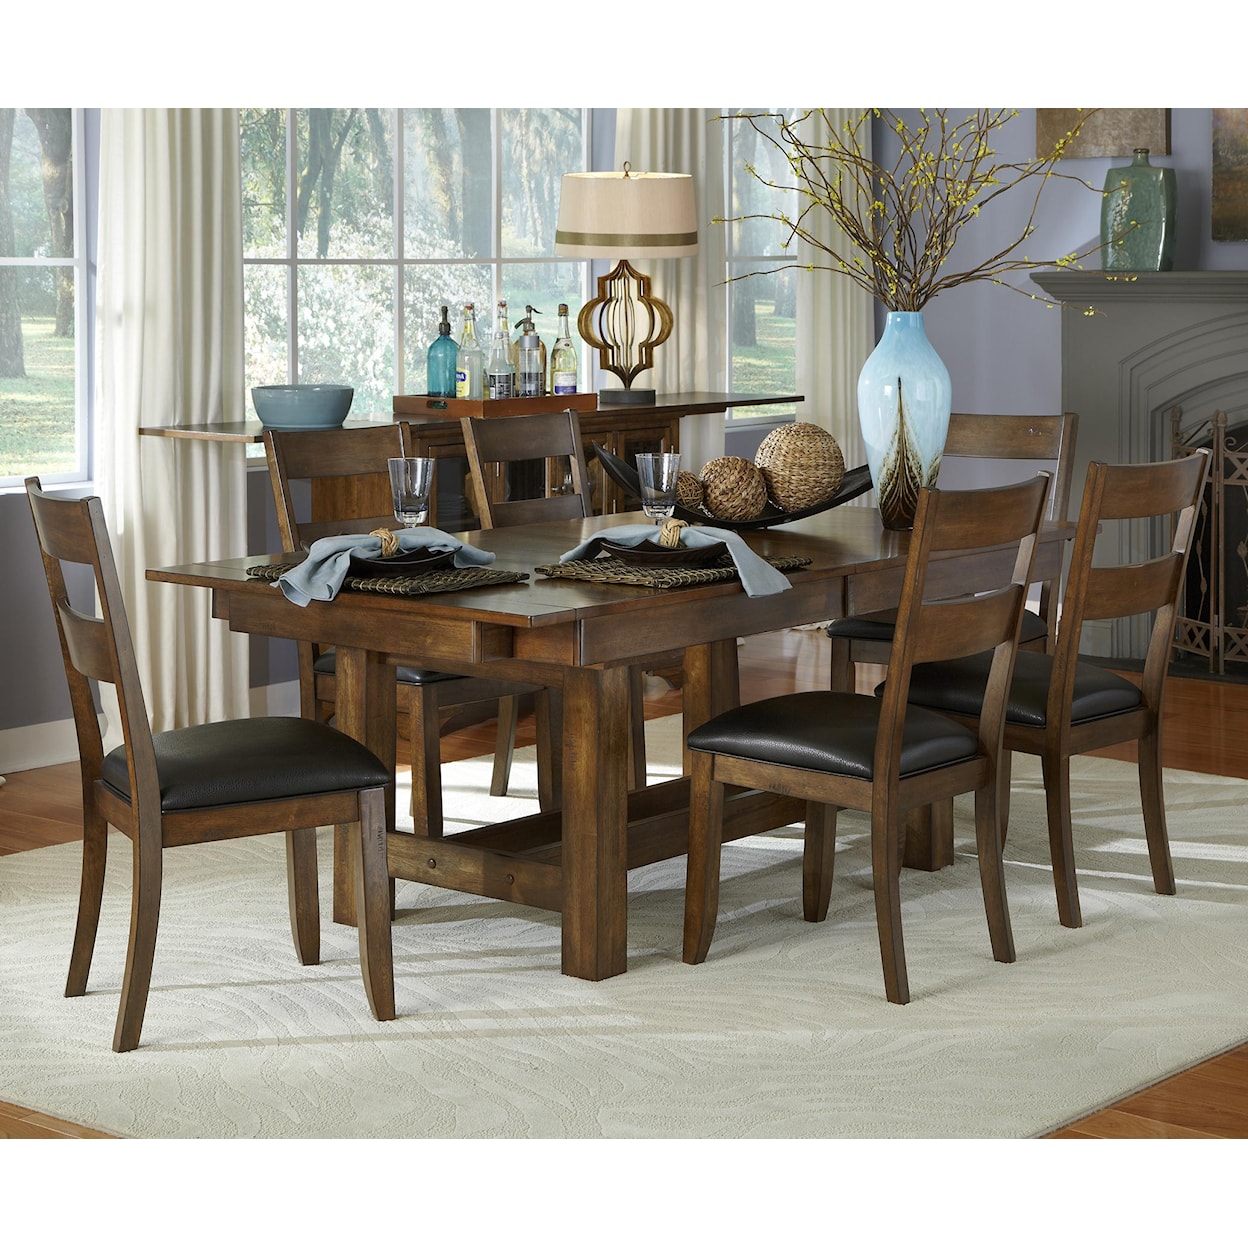 AAmerica Mariposa 7 Piece Table and Chairs Set